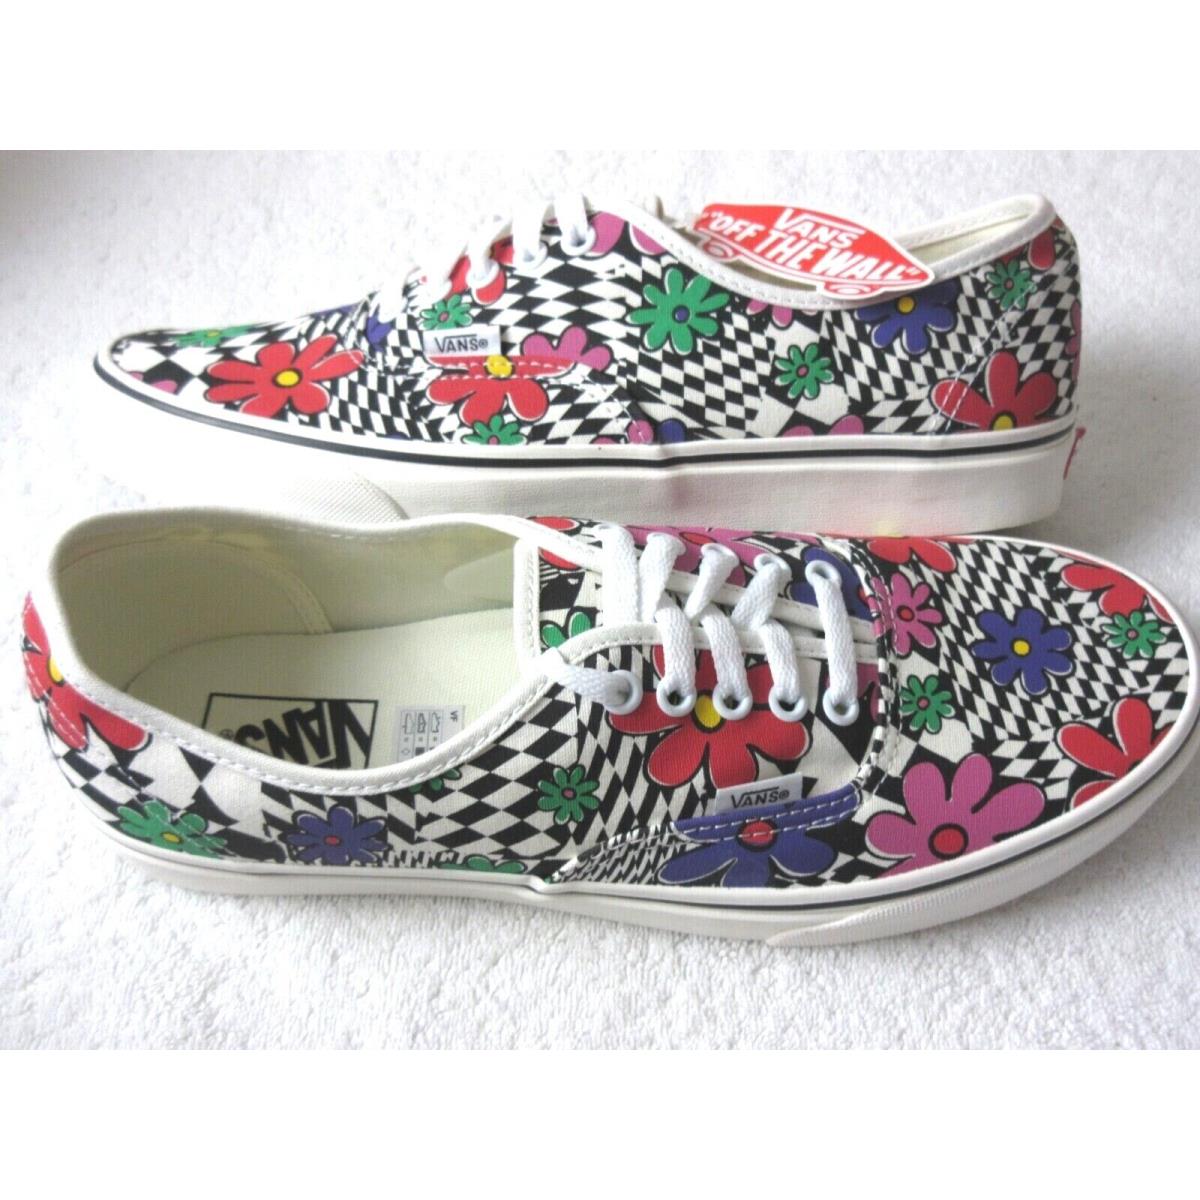 Vans Authentic Printed Floral Men`s Printed Floral Checkerboard Marshmallow Shoes Size 11.5